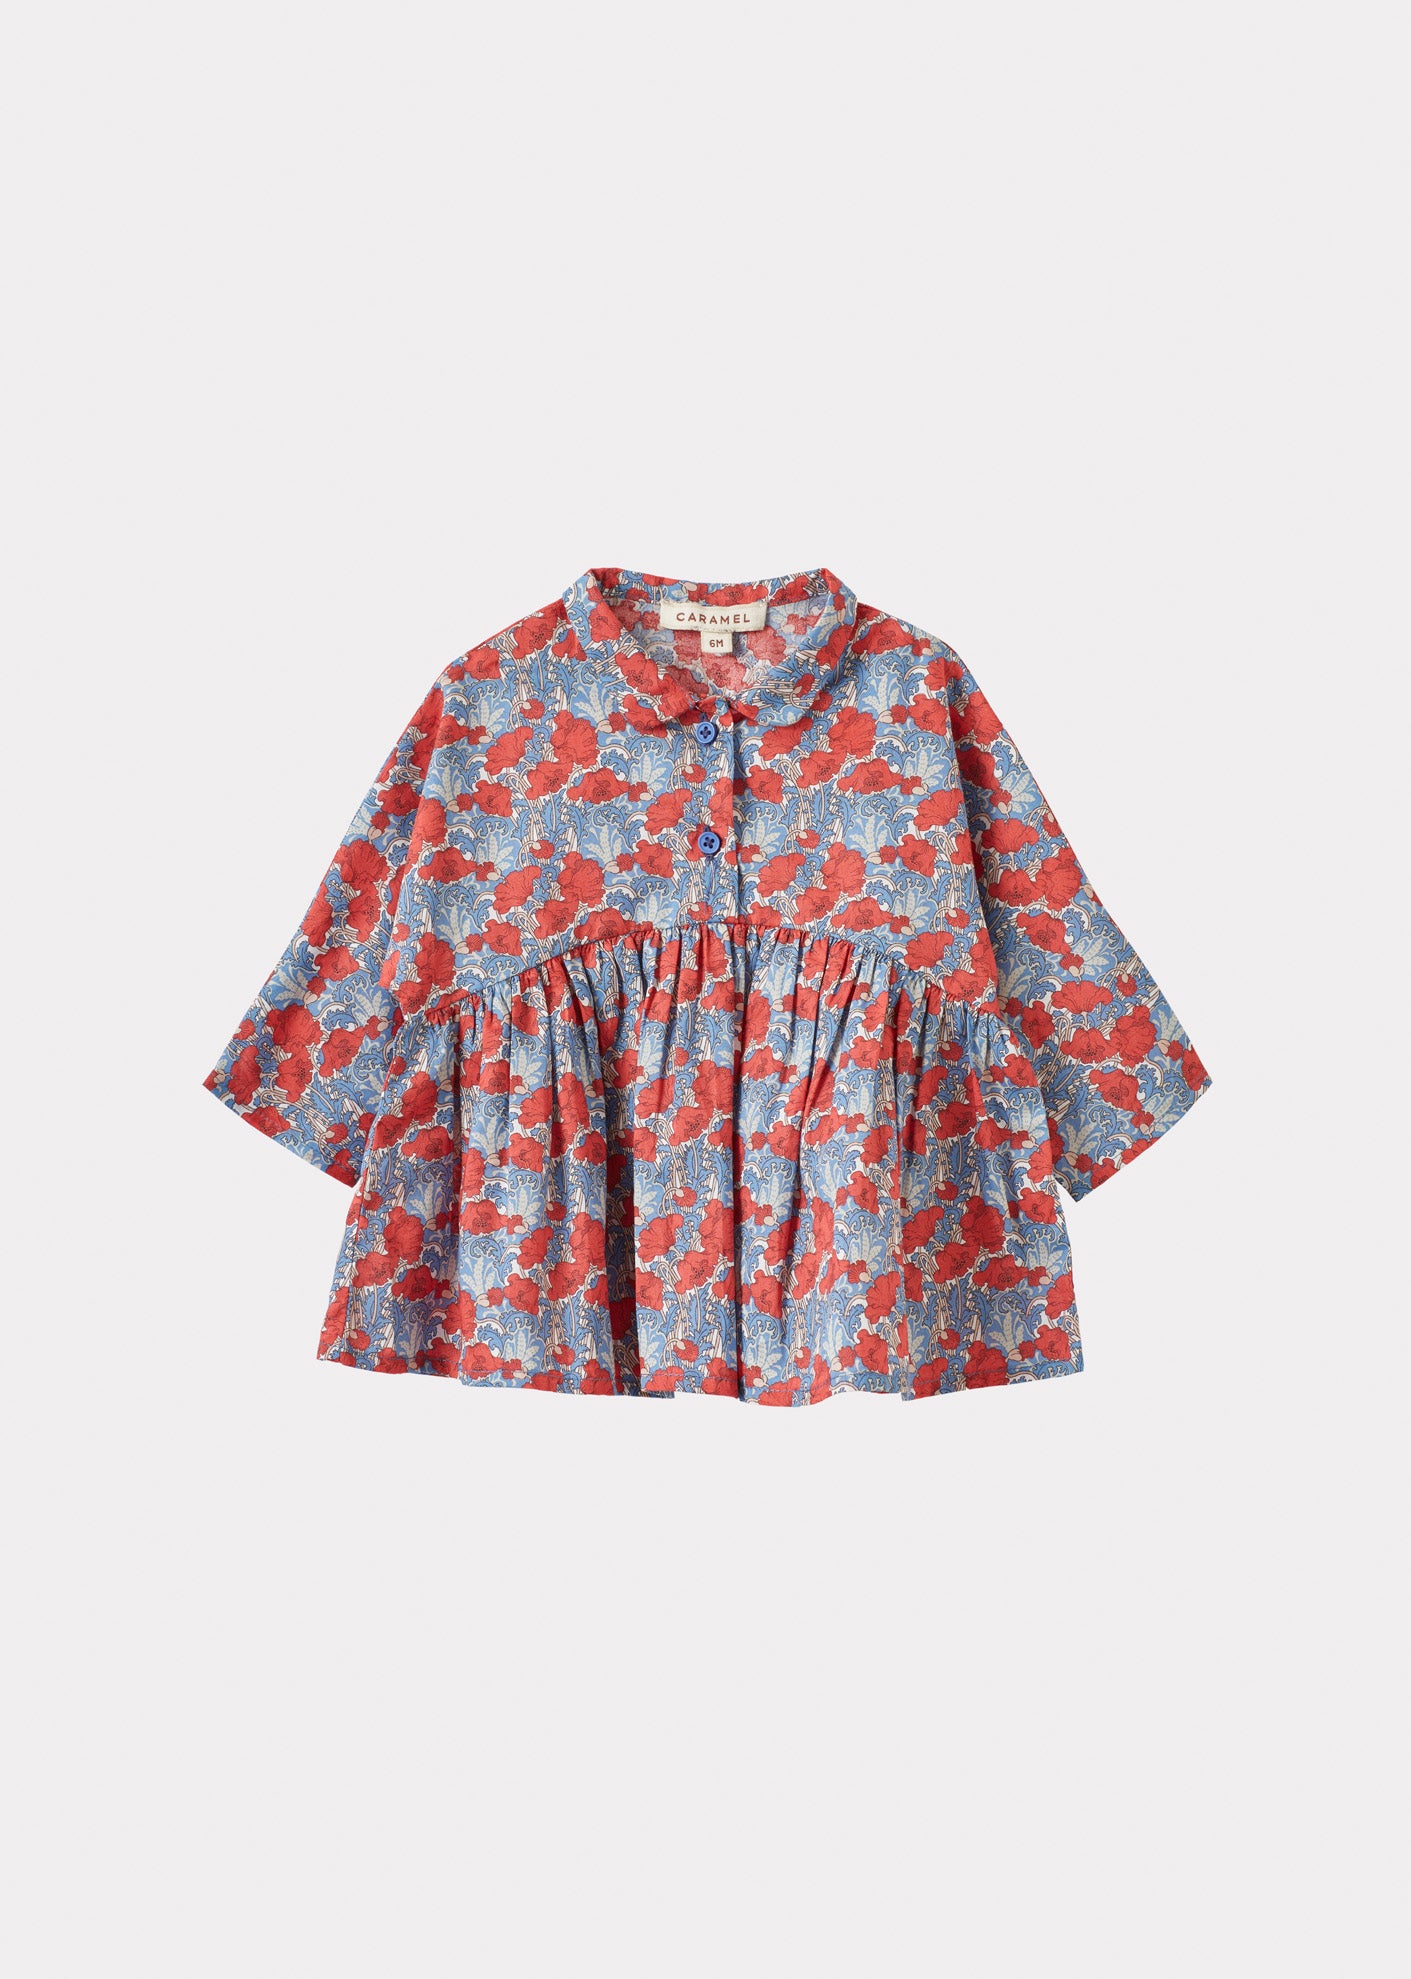 LEONA BABY TOP - BLUE/RED